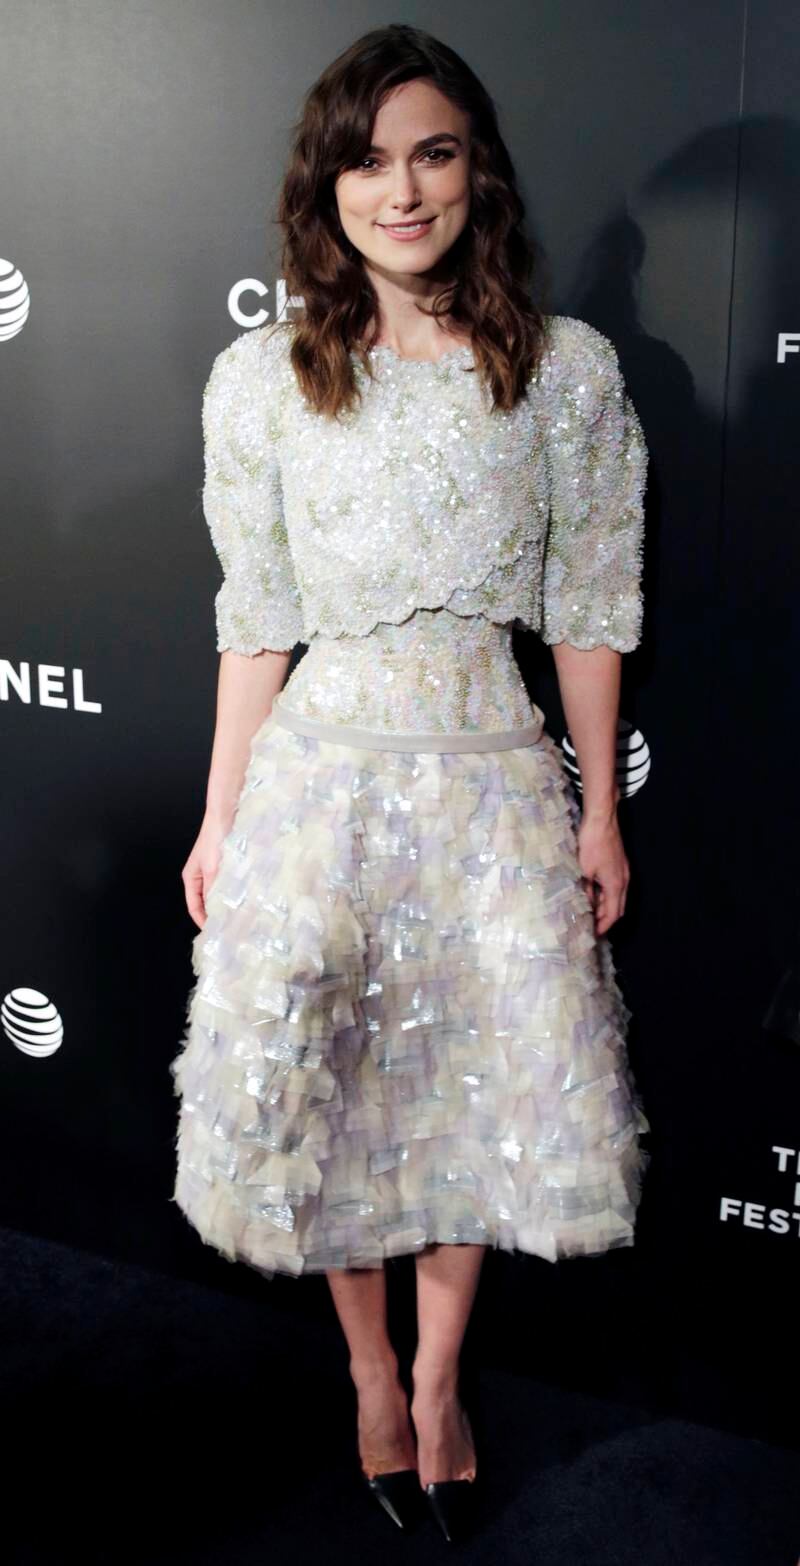 Keira Knightley, in Chanel, arrives at the premiere of 'Begin Again' at the Tribeca Film Festival in New York, US, on April 26, 2014.